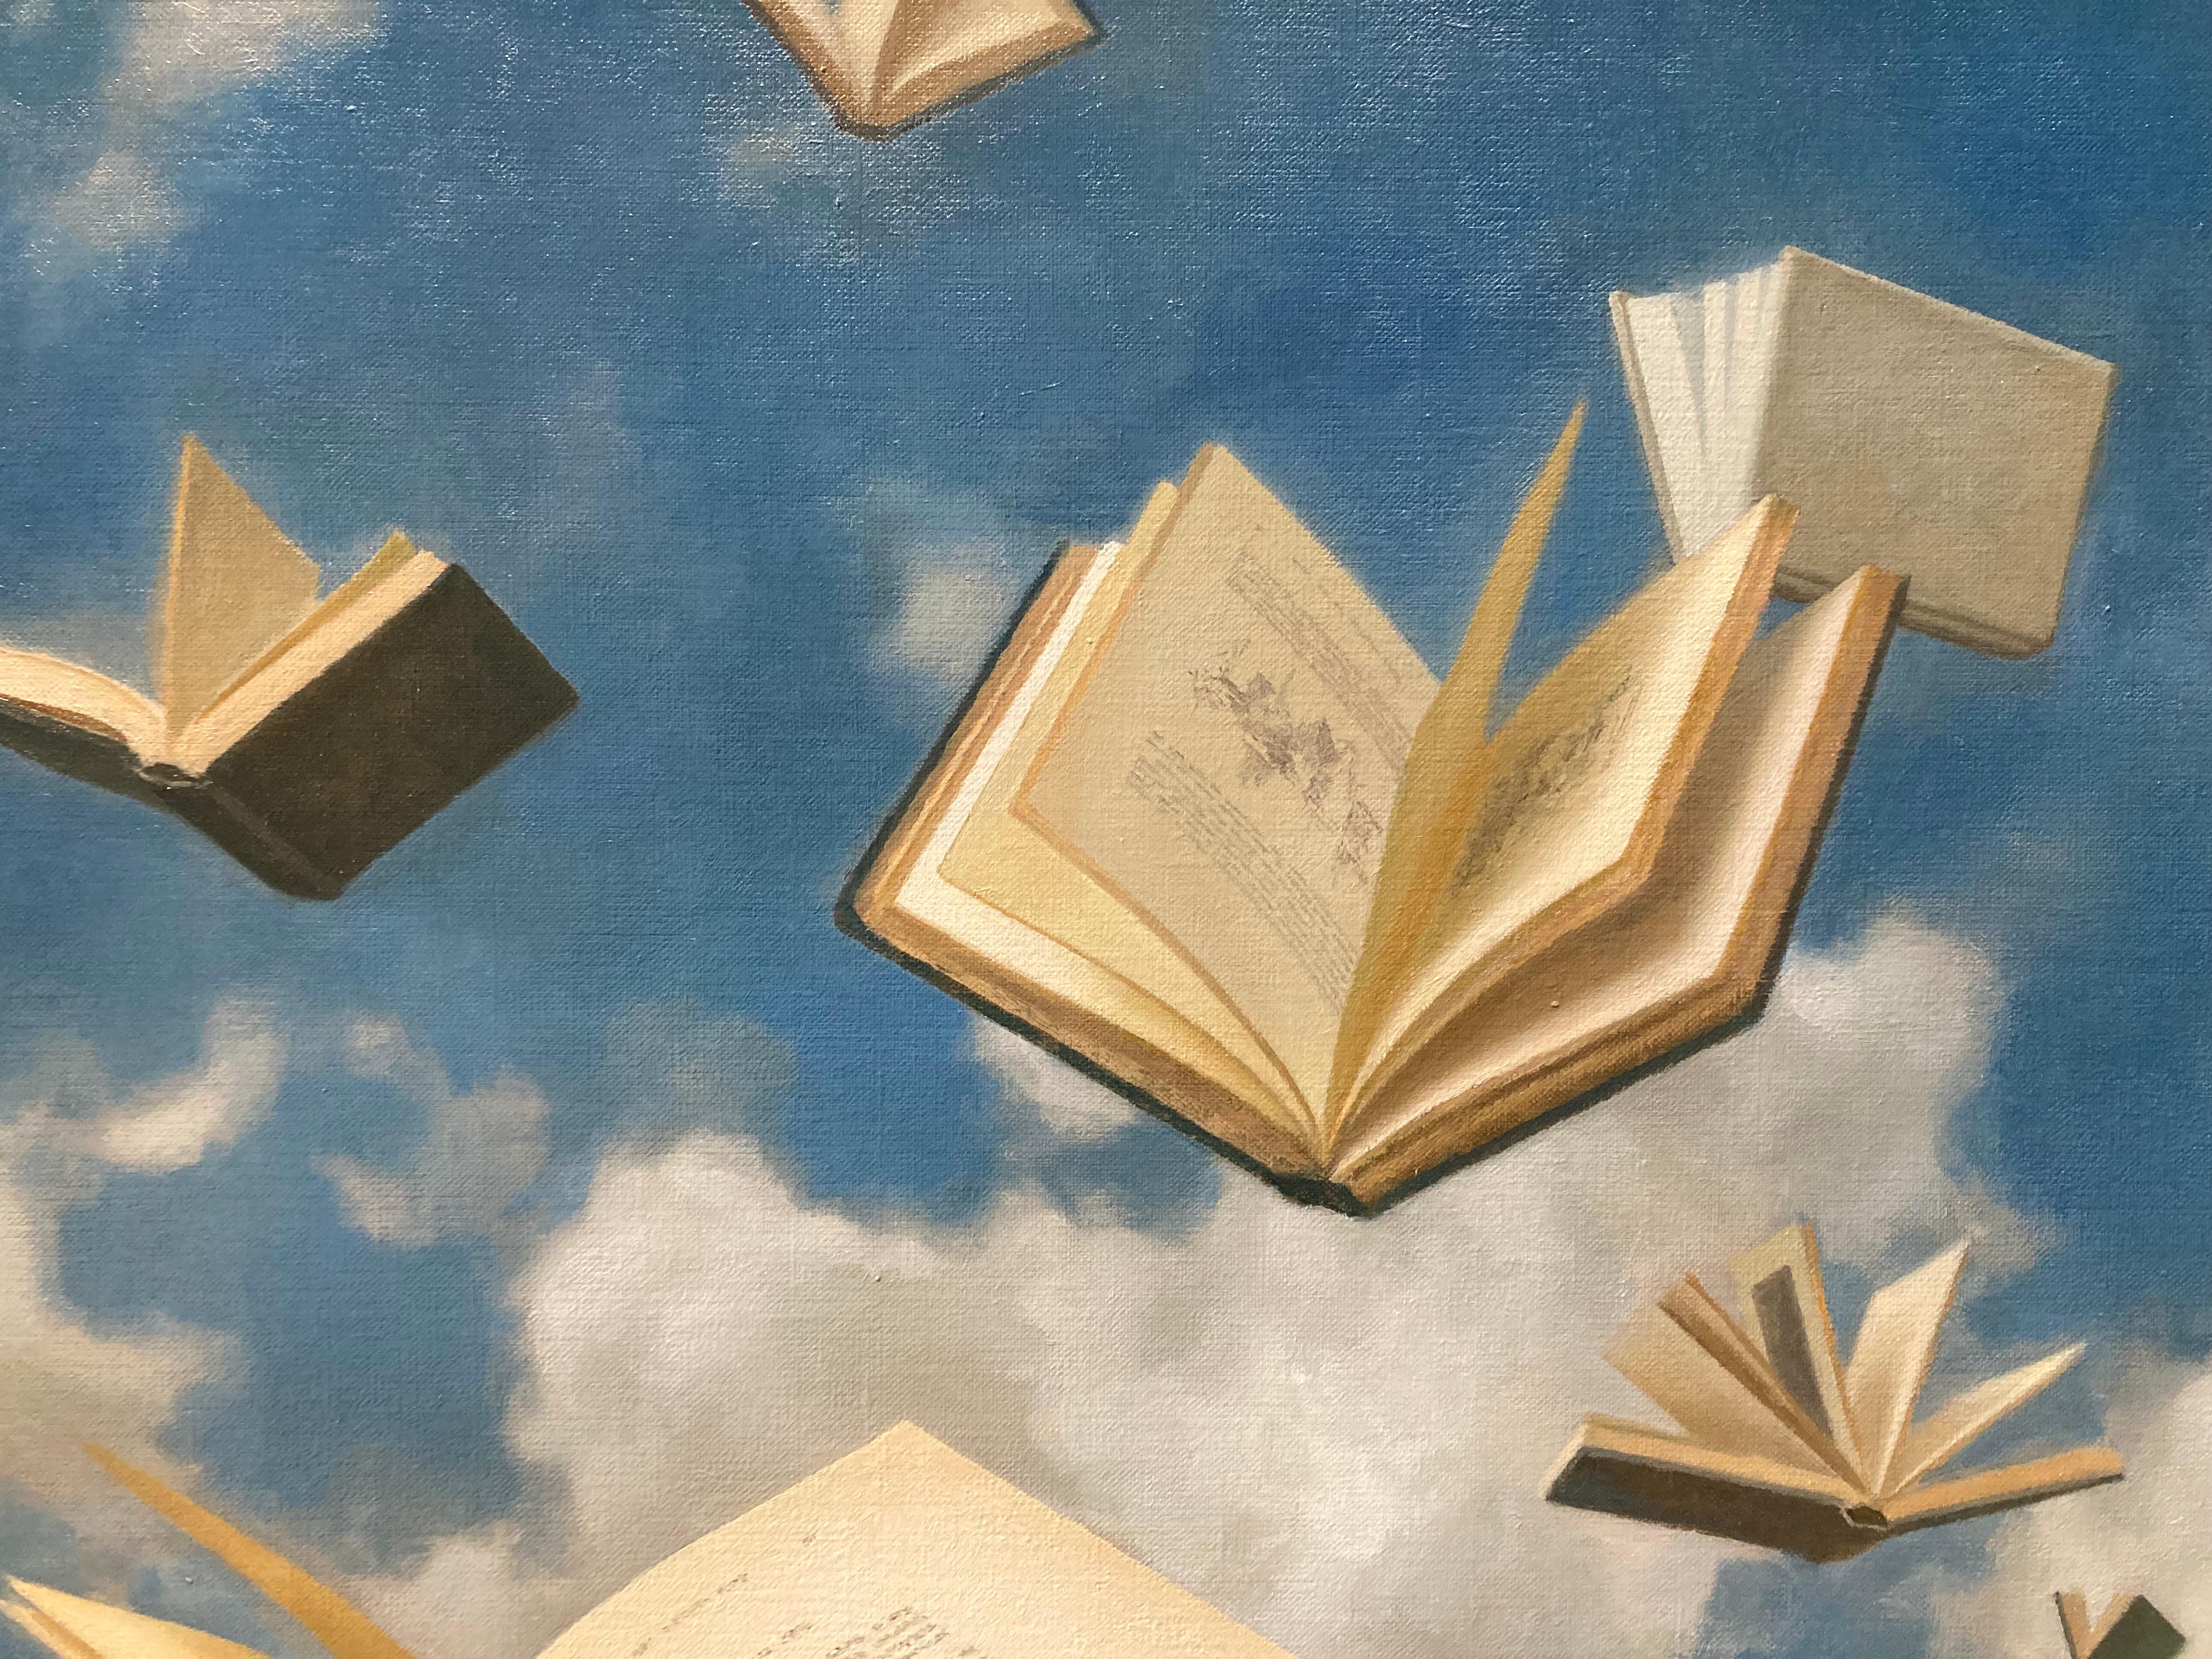 Floating Books and Butterflies - 2023 Surrealist still life and skyscape 9